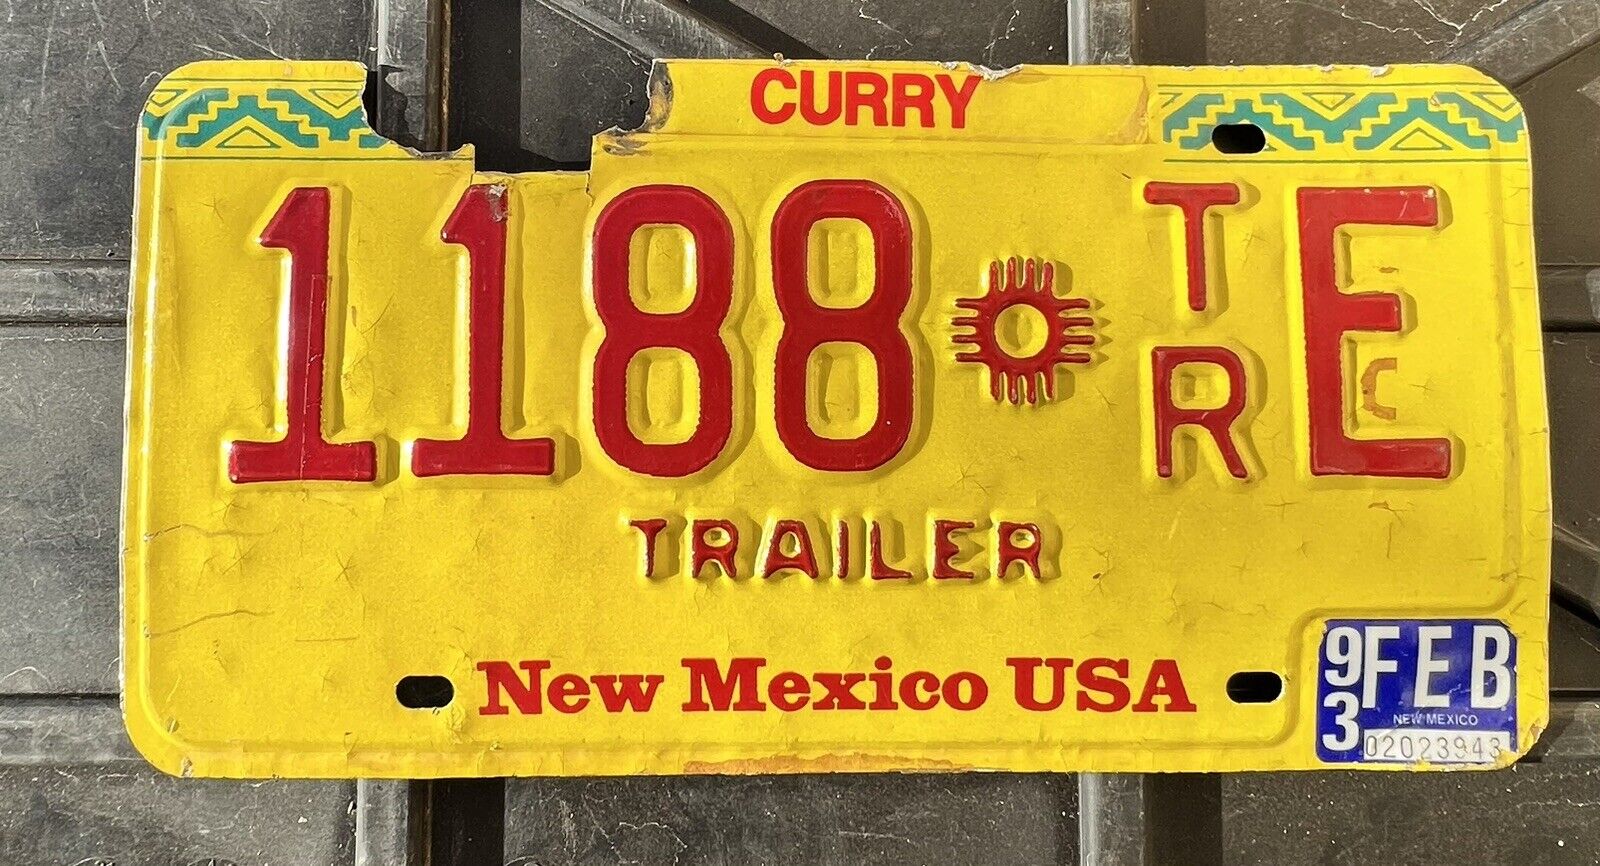 1993 NM CURRY TRAILER license plate Land Of Enchantment New Mexico “1188 TR E